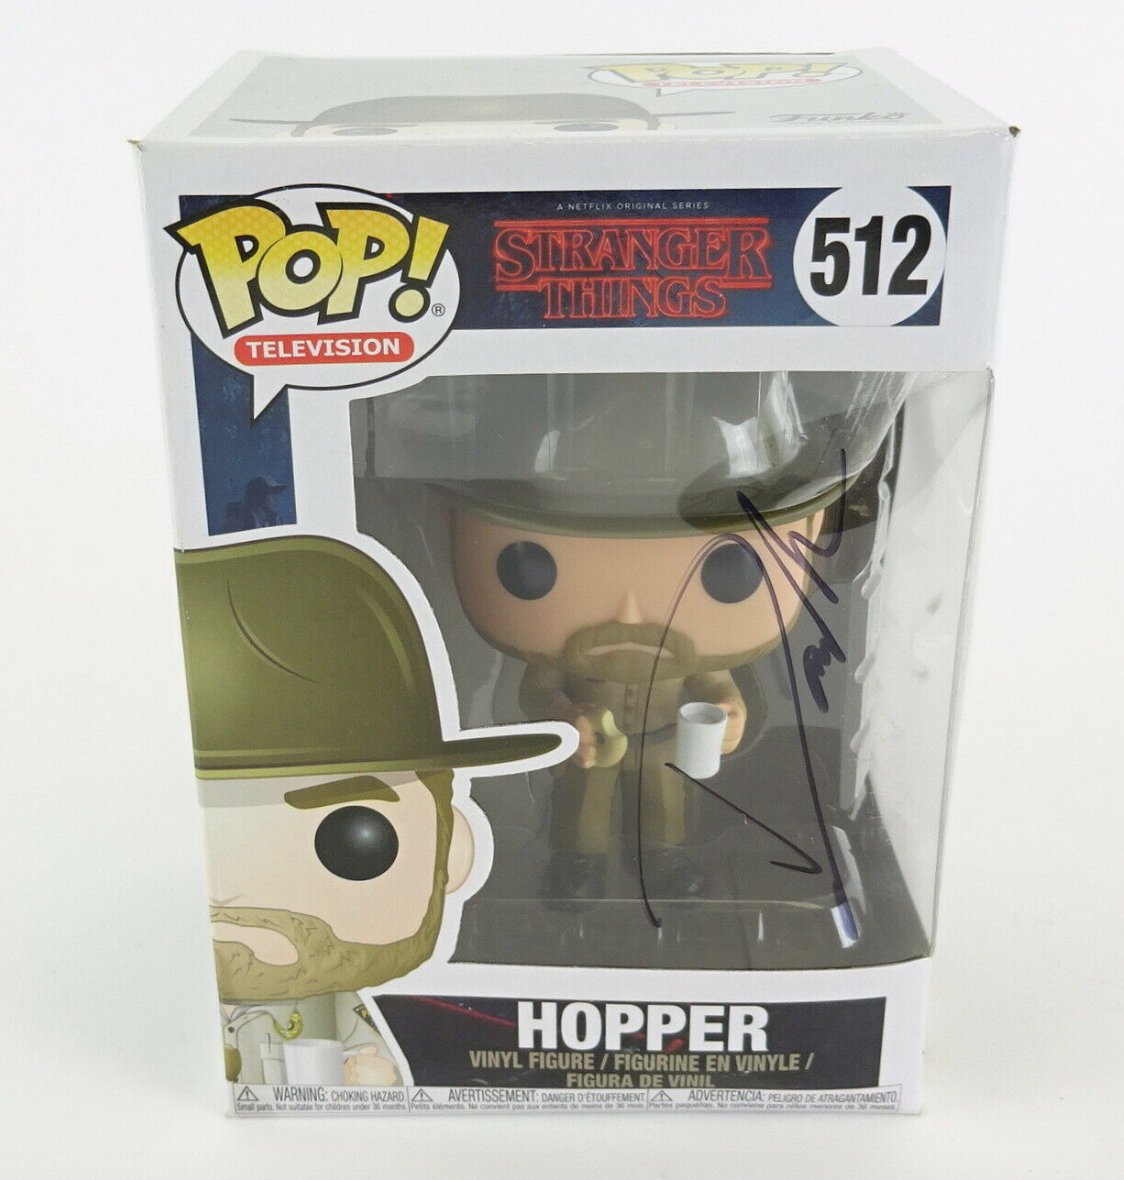 Stranger Things Hopper Funko Signed by David Harbour at Comic Con Liverpool 2020 